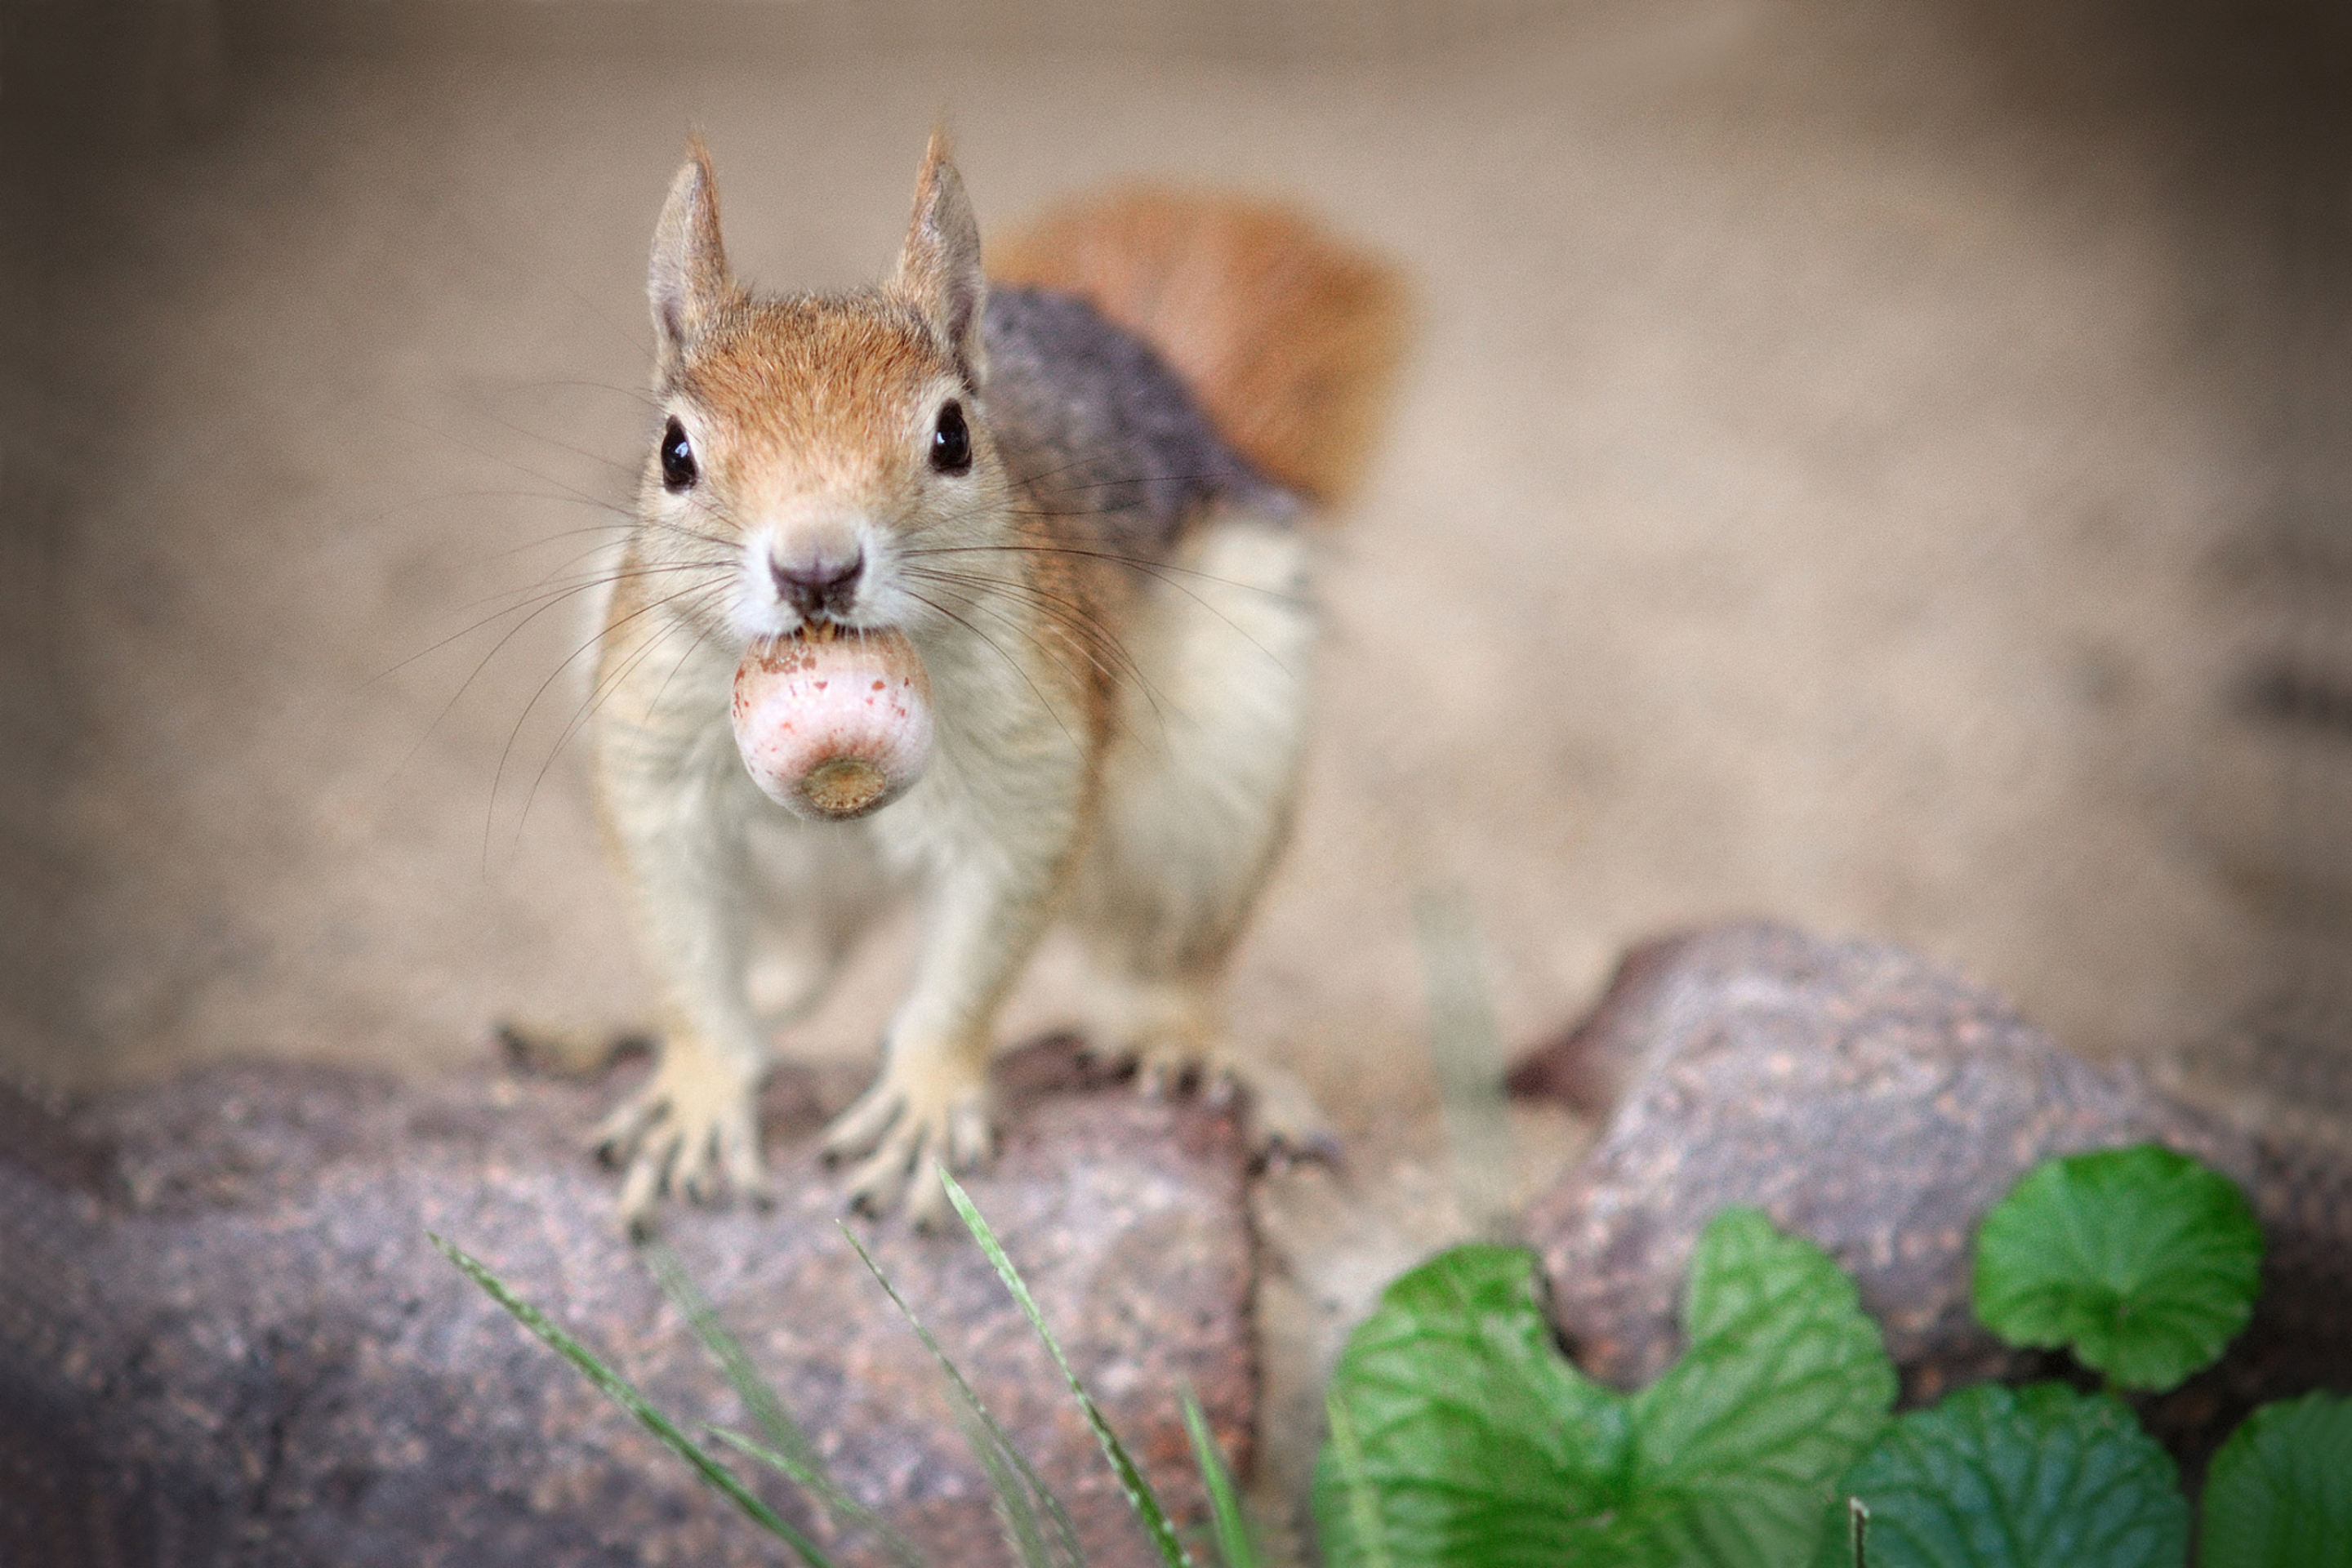 Funny Squirrel With Nut wallpaper 2880x1920